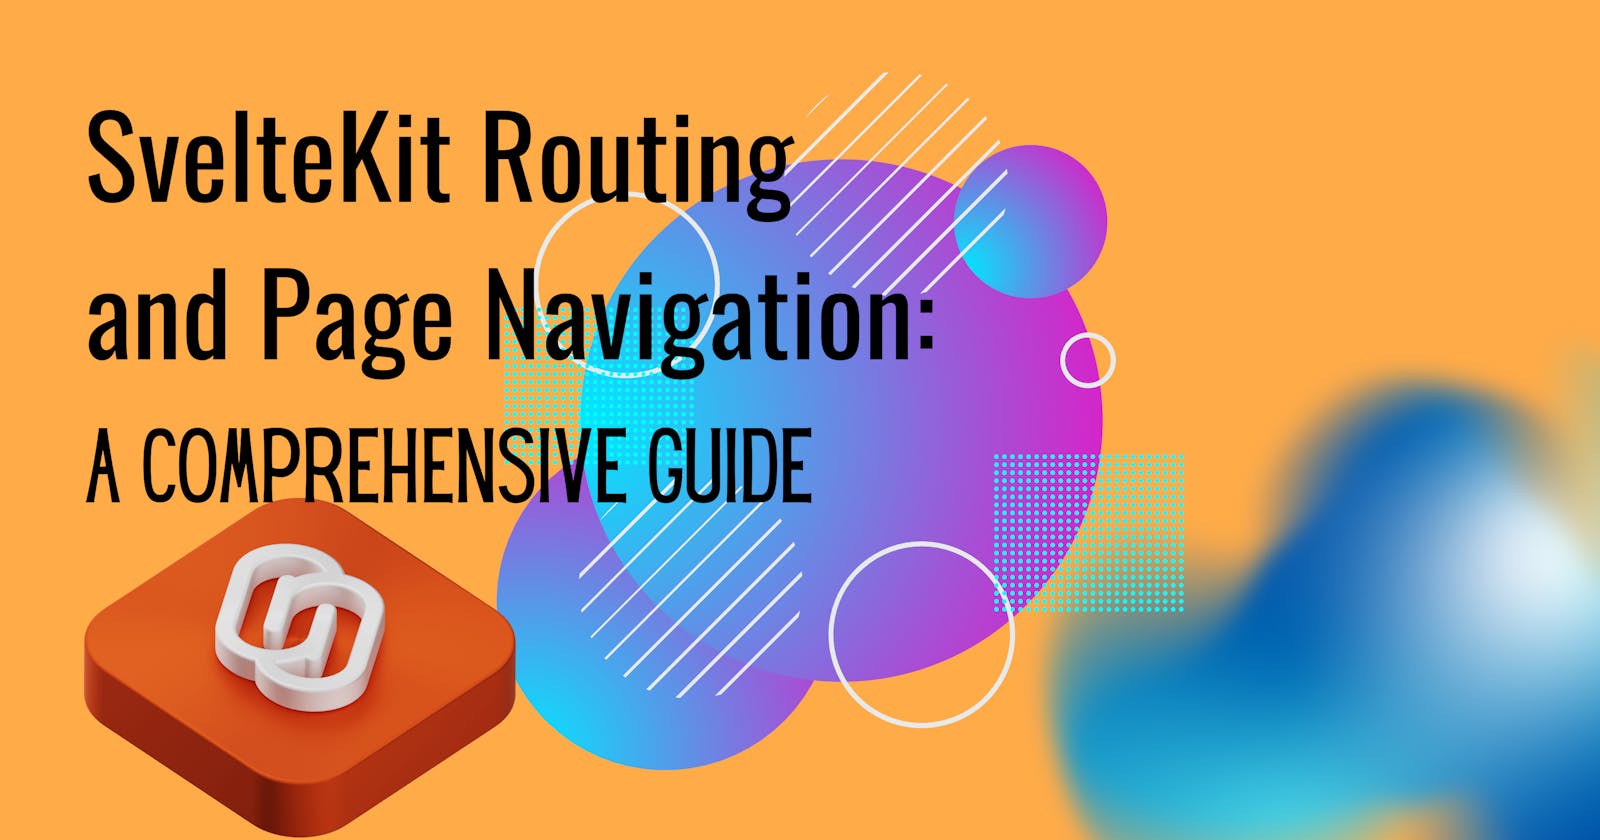 SvelteKit Routing and Page Navigation: A Comprehensive Guide